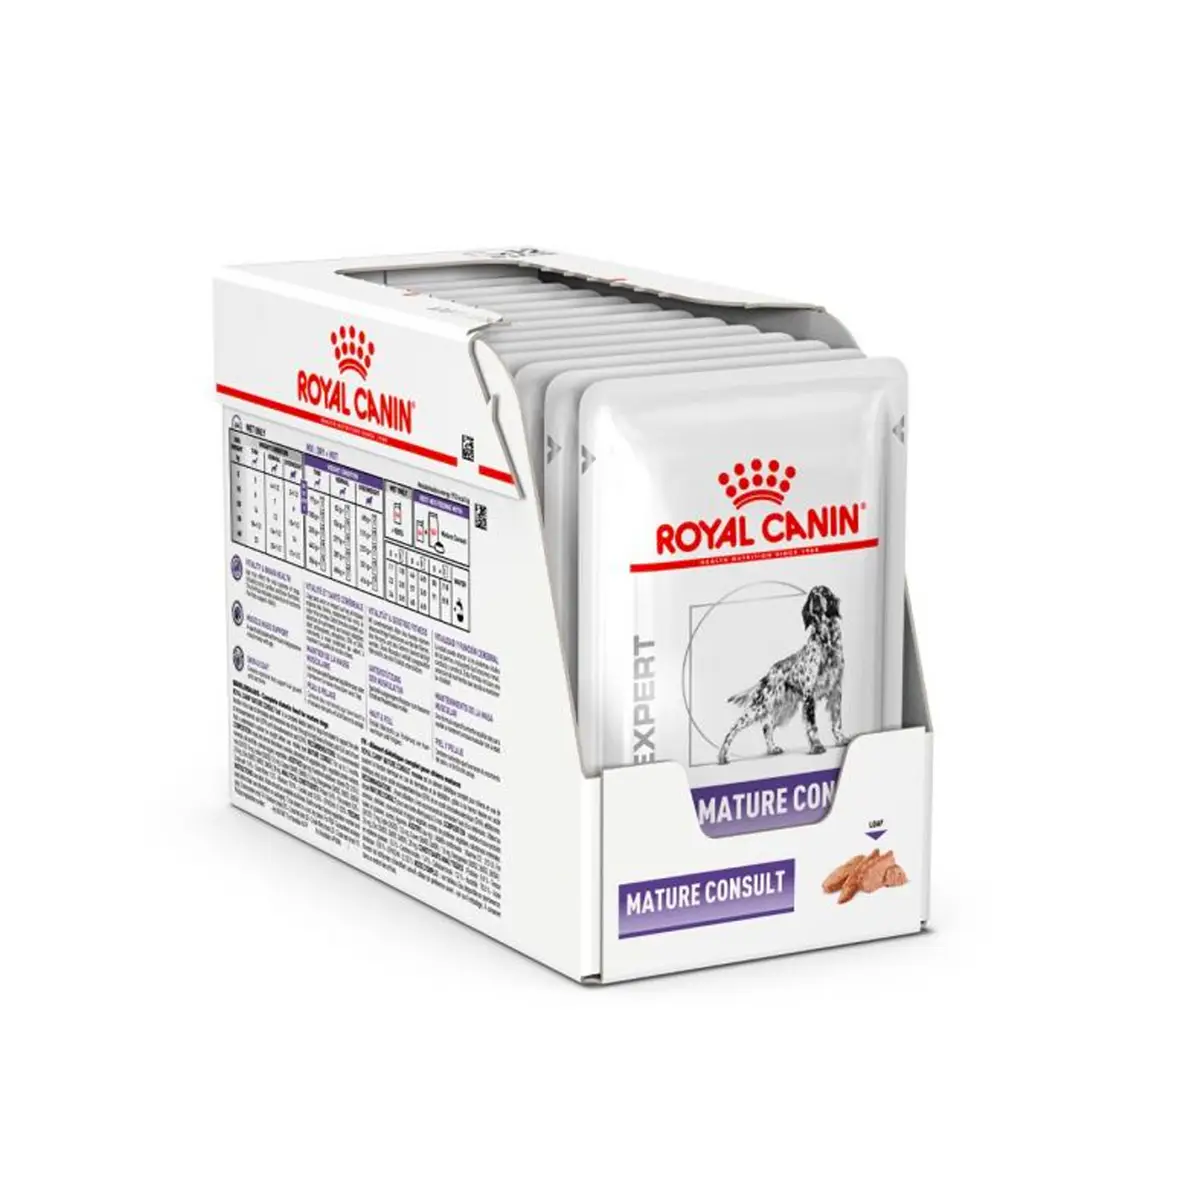 Royal Canin - Mature Consult Dog Pouch 85g 